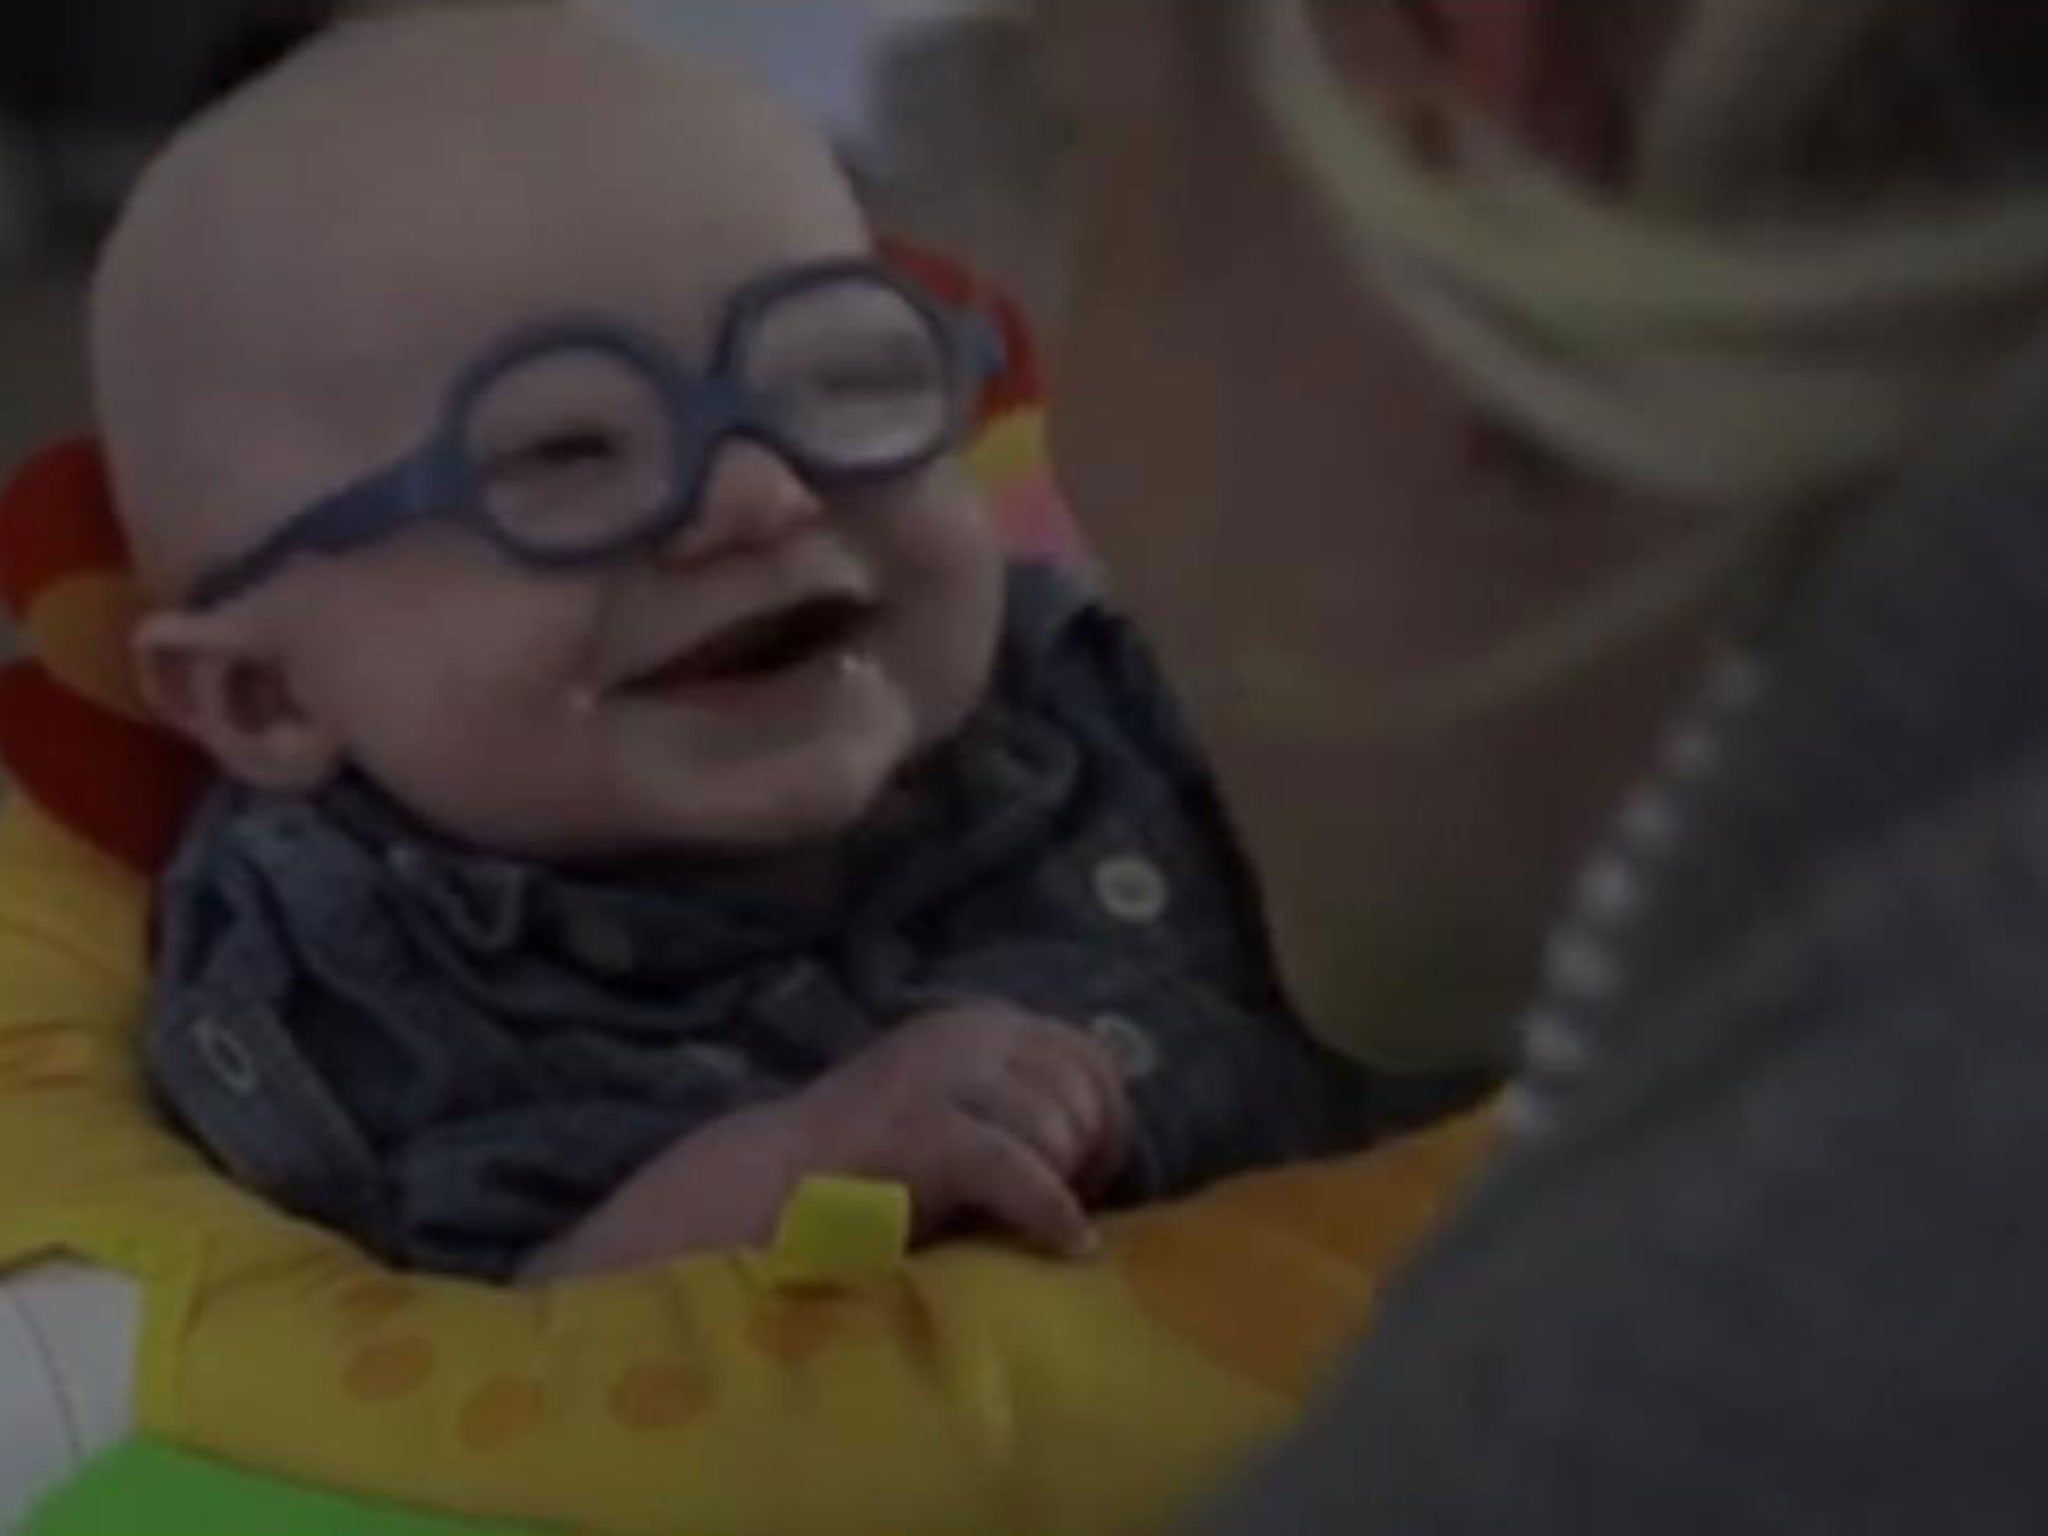 Leopold Wilbur Reppond was filmed smiling and giggling as he saw his mother properly for the first time